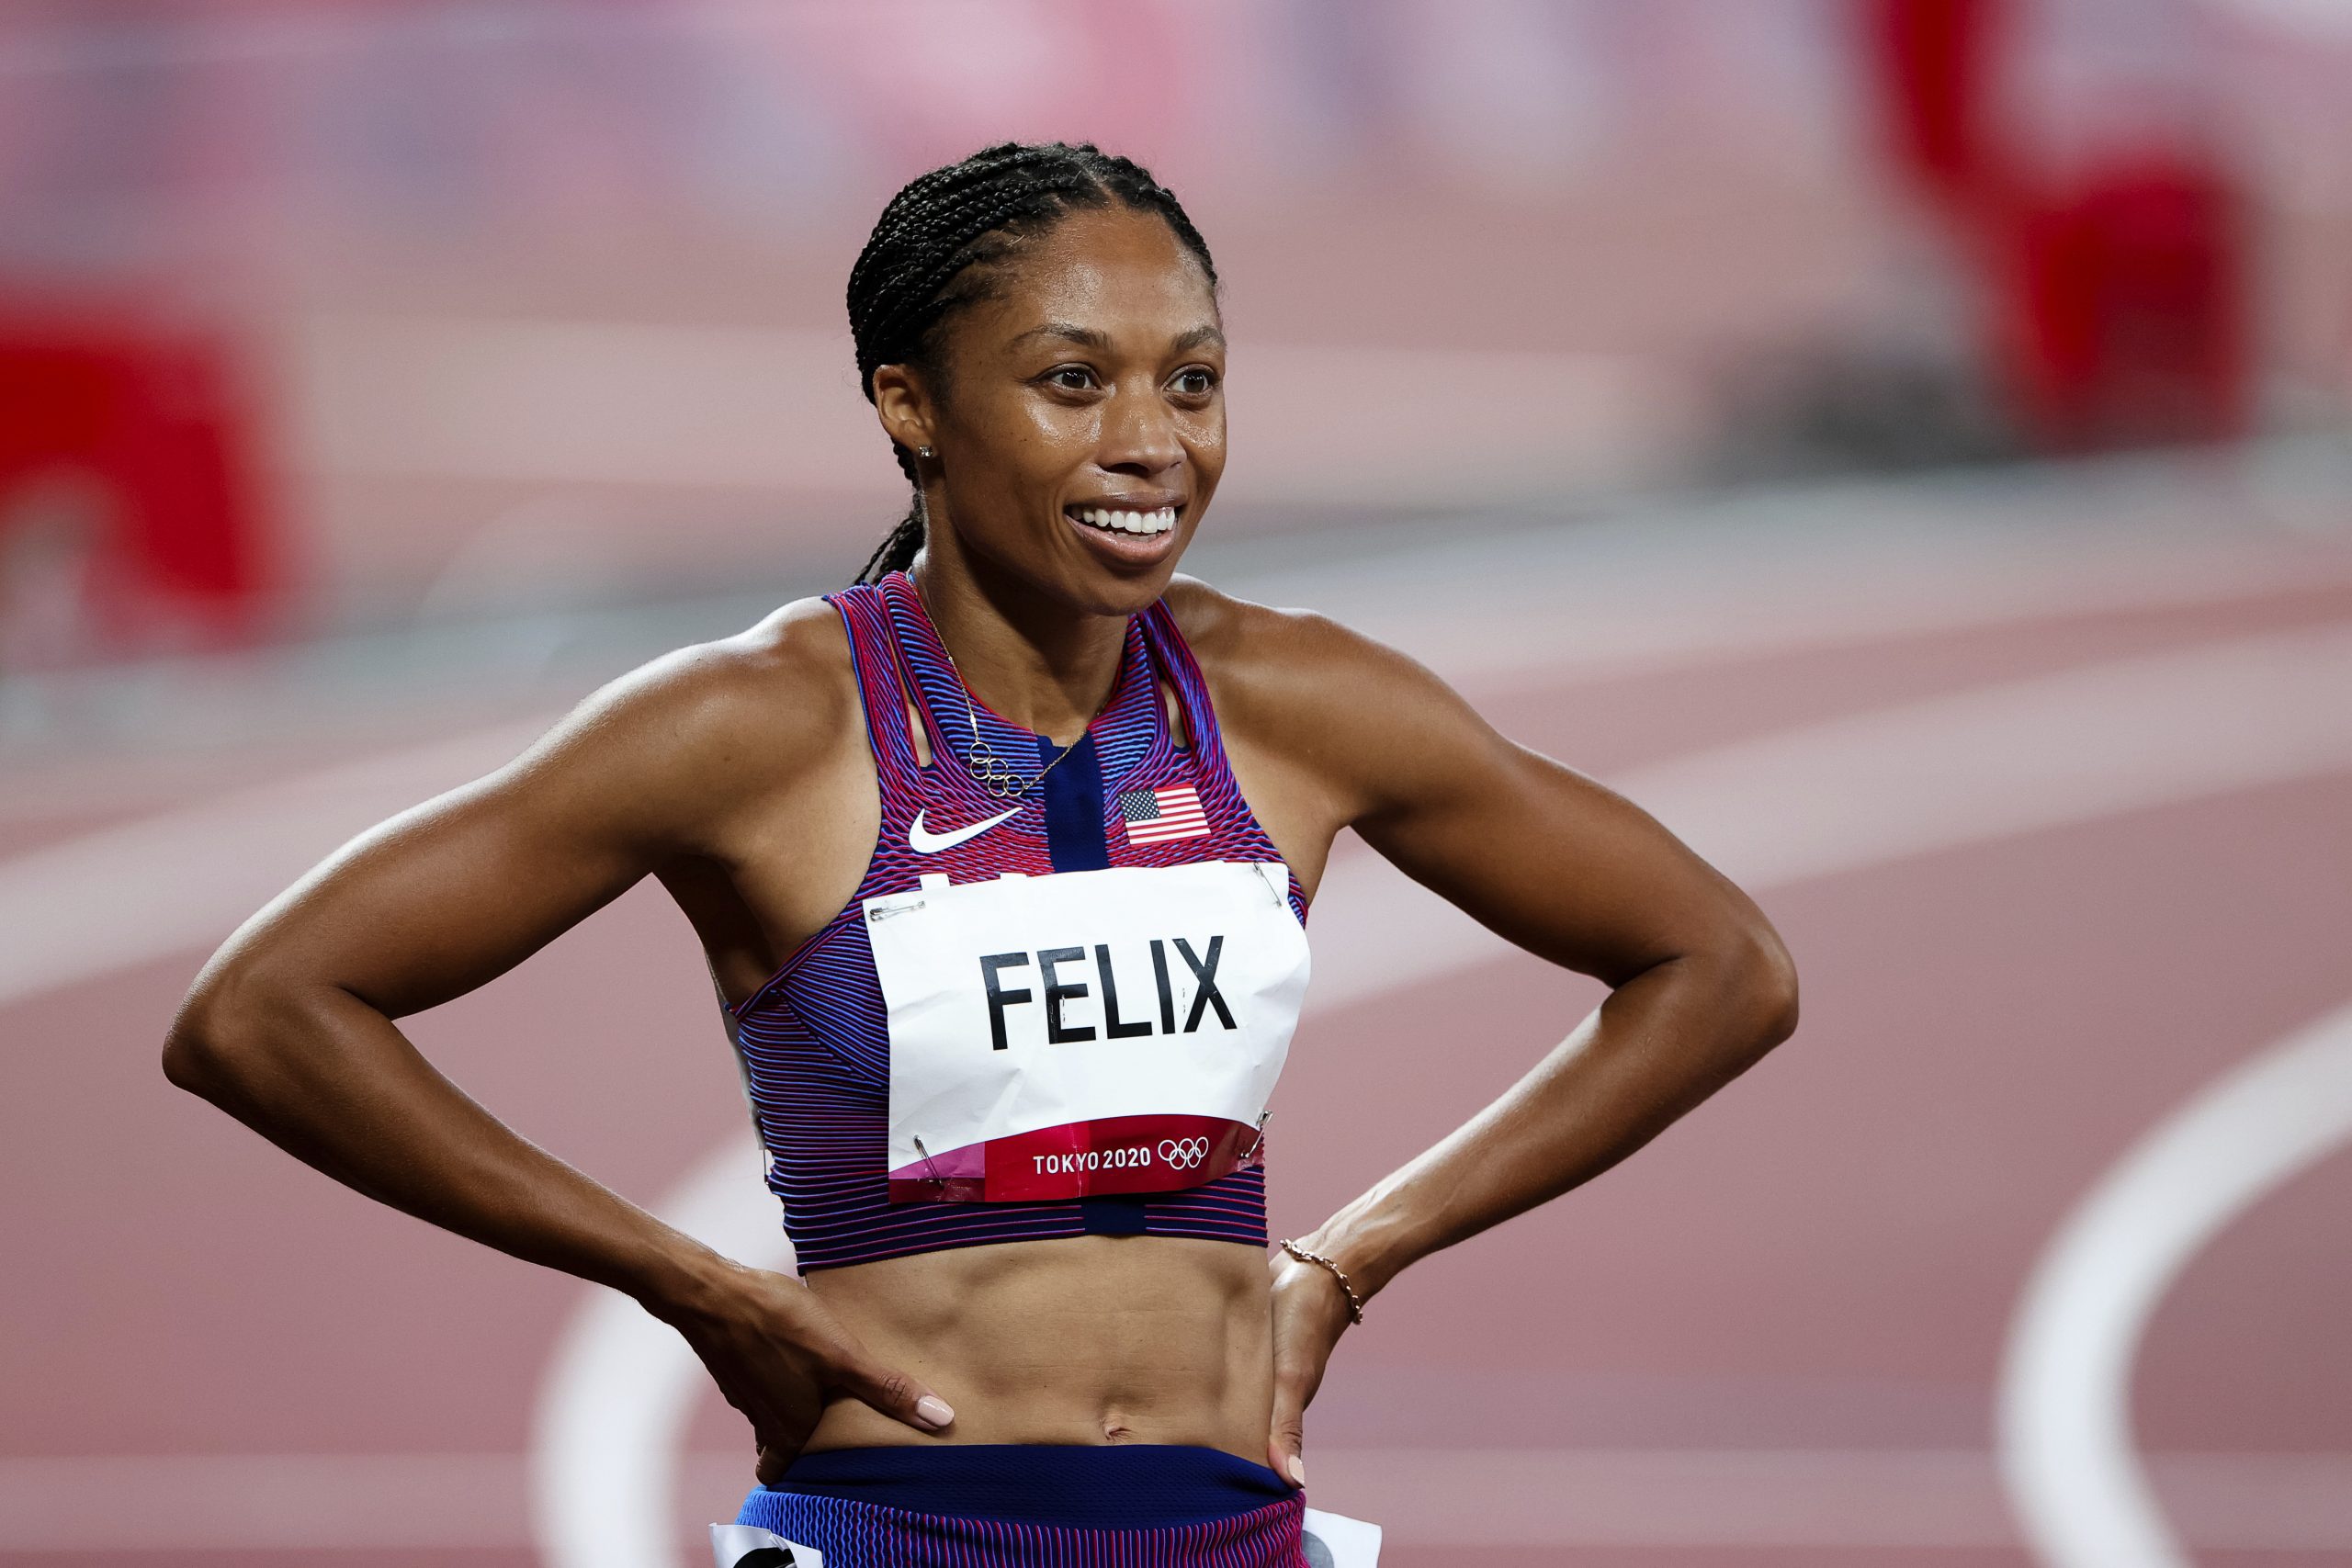 TOKYO, JAPAN - AUGUST 06: Allyson Felix of Team United States during the Women's 400m Final on Day 14 of the Tokyo 2020 Olympic Games at Olympic Stadium on August 06, 2021 in Tokyo, Japan. (Photo by Pete Dovgan/Speed Media/Icon Sportswire) (Icon Sportswire via AP Images)